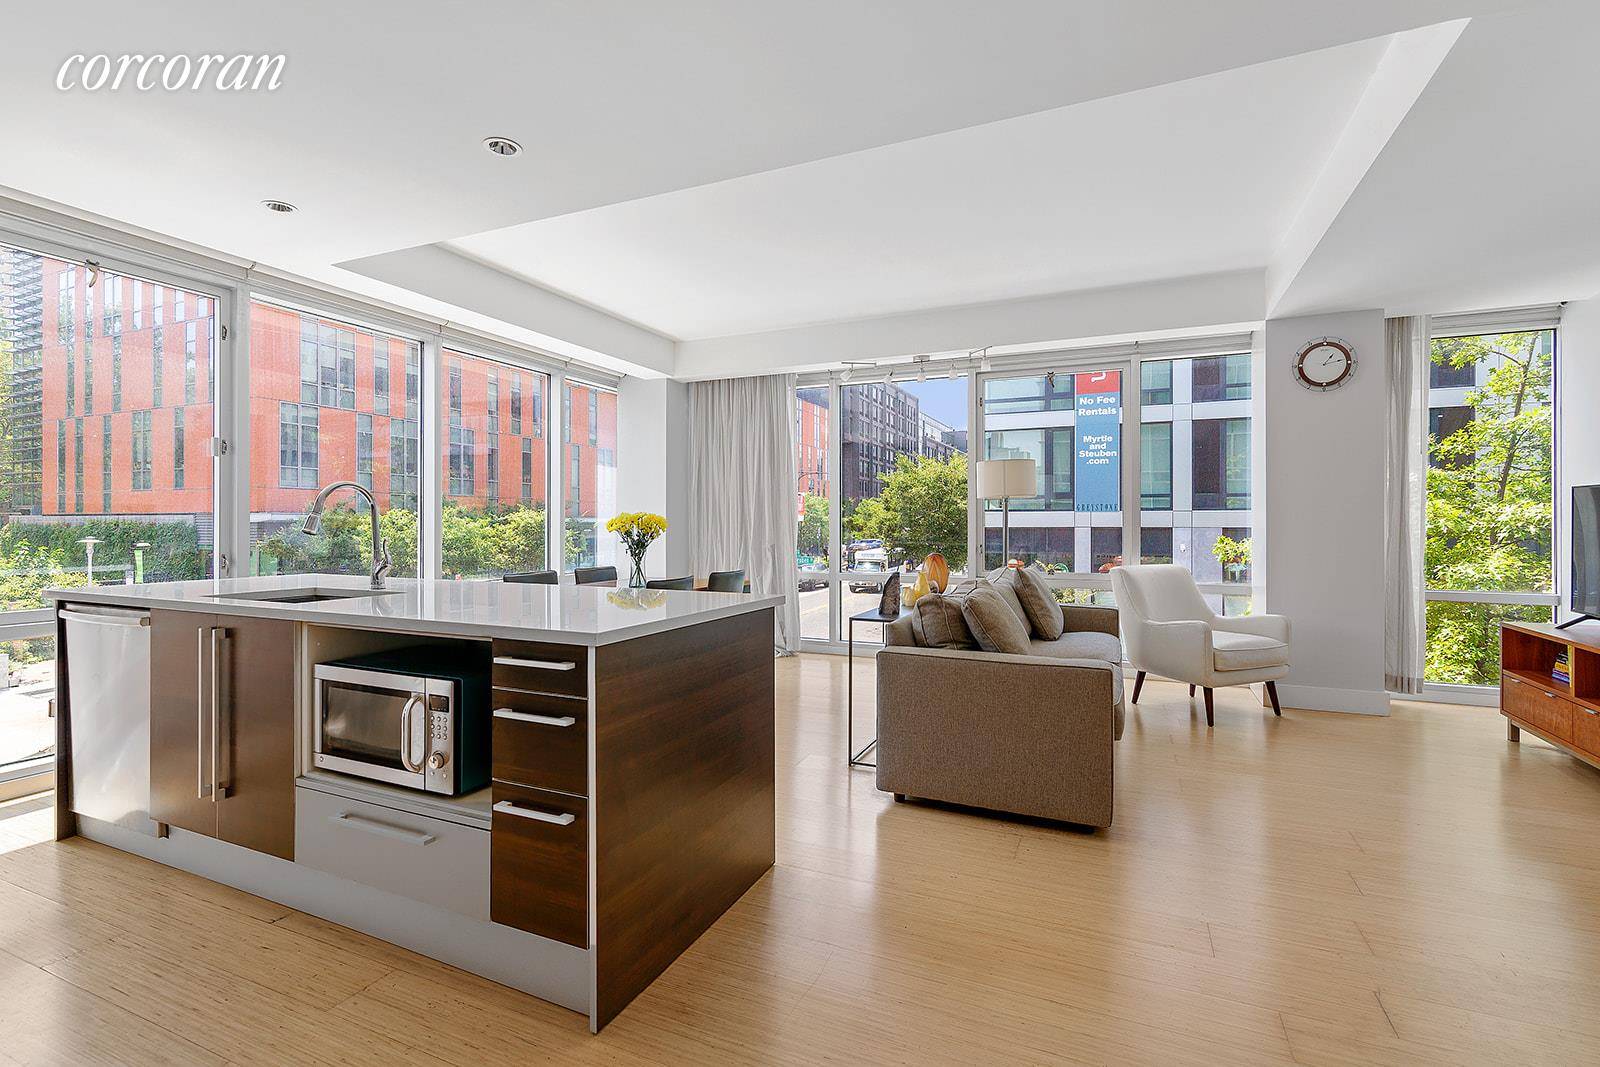 Located in bustling Clinton Hill, this stylish corner apartment has two bedrooms and two full bathrooms.